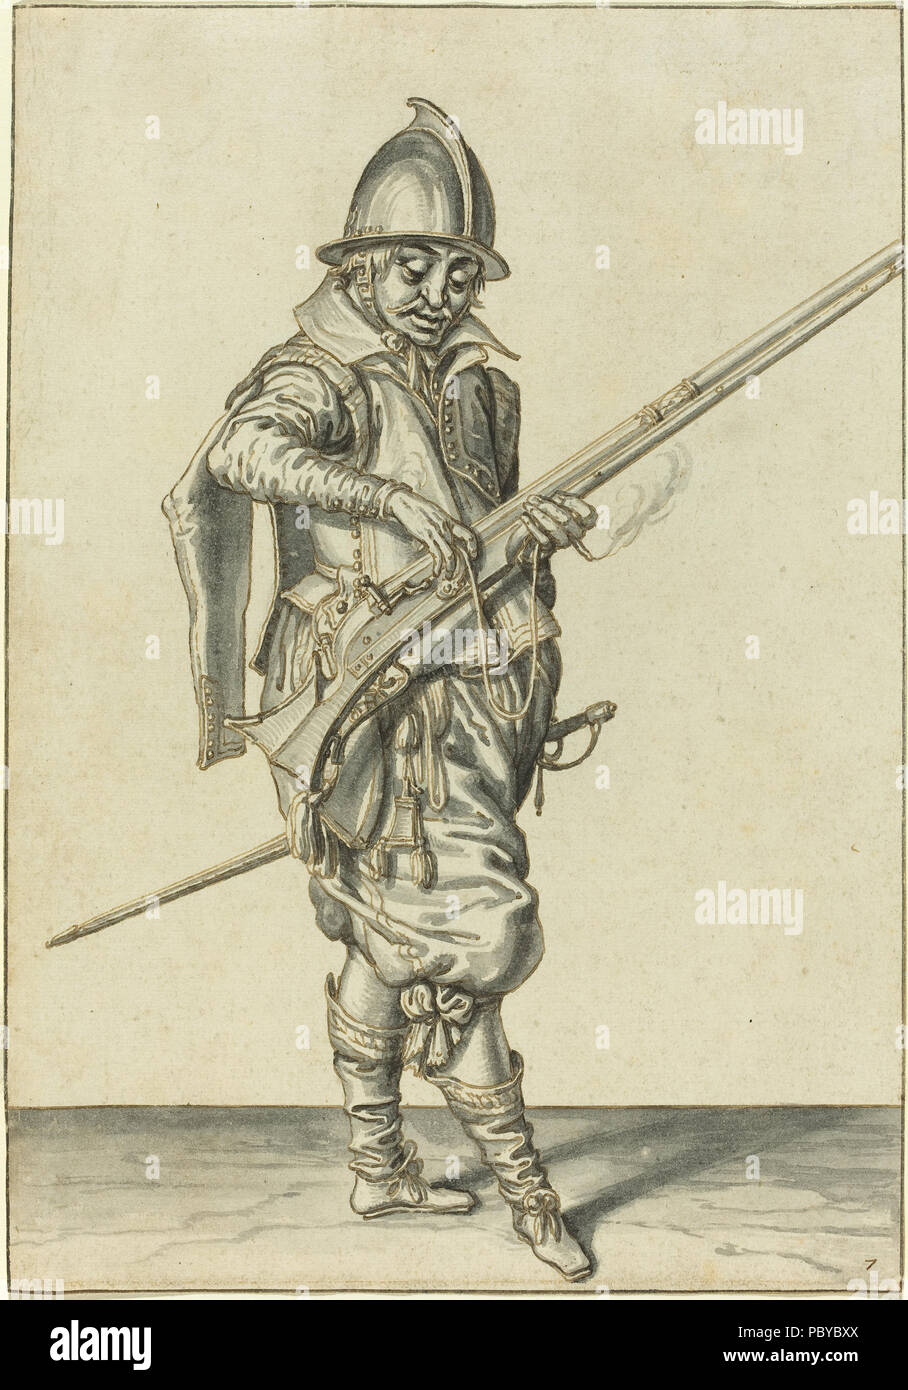 Jacques de Gheyn II (Dutch, 1565 - 1629 ), Elegantly Dressed Soldier Preparing to Fire His Caliver, c. 1597, pen and brown ink with gray wash on laid paper, Gift of The Ahmanson Foundation 183 Elegantly Dressed Soldier Tamping His Caliver Stock Photo